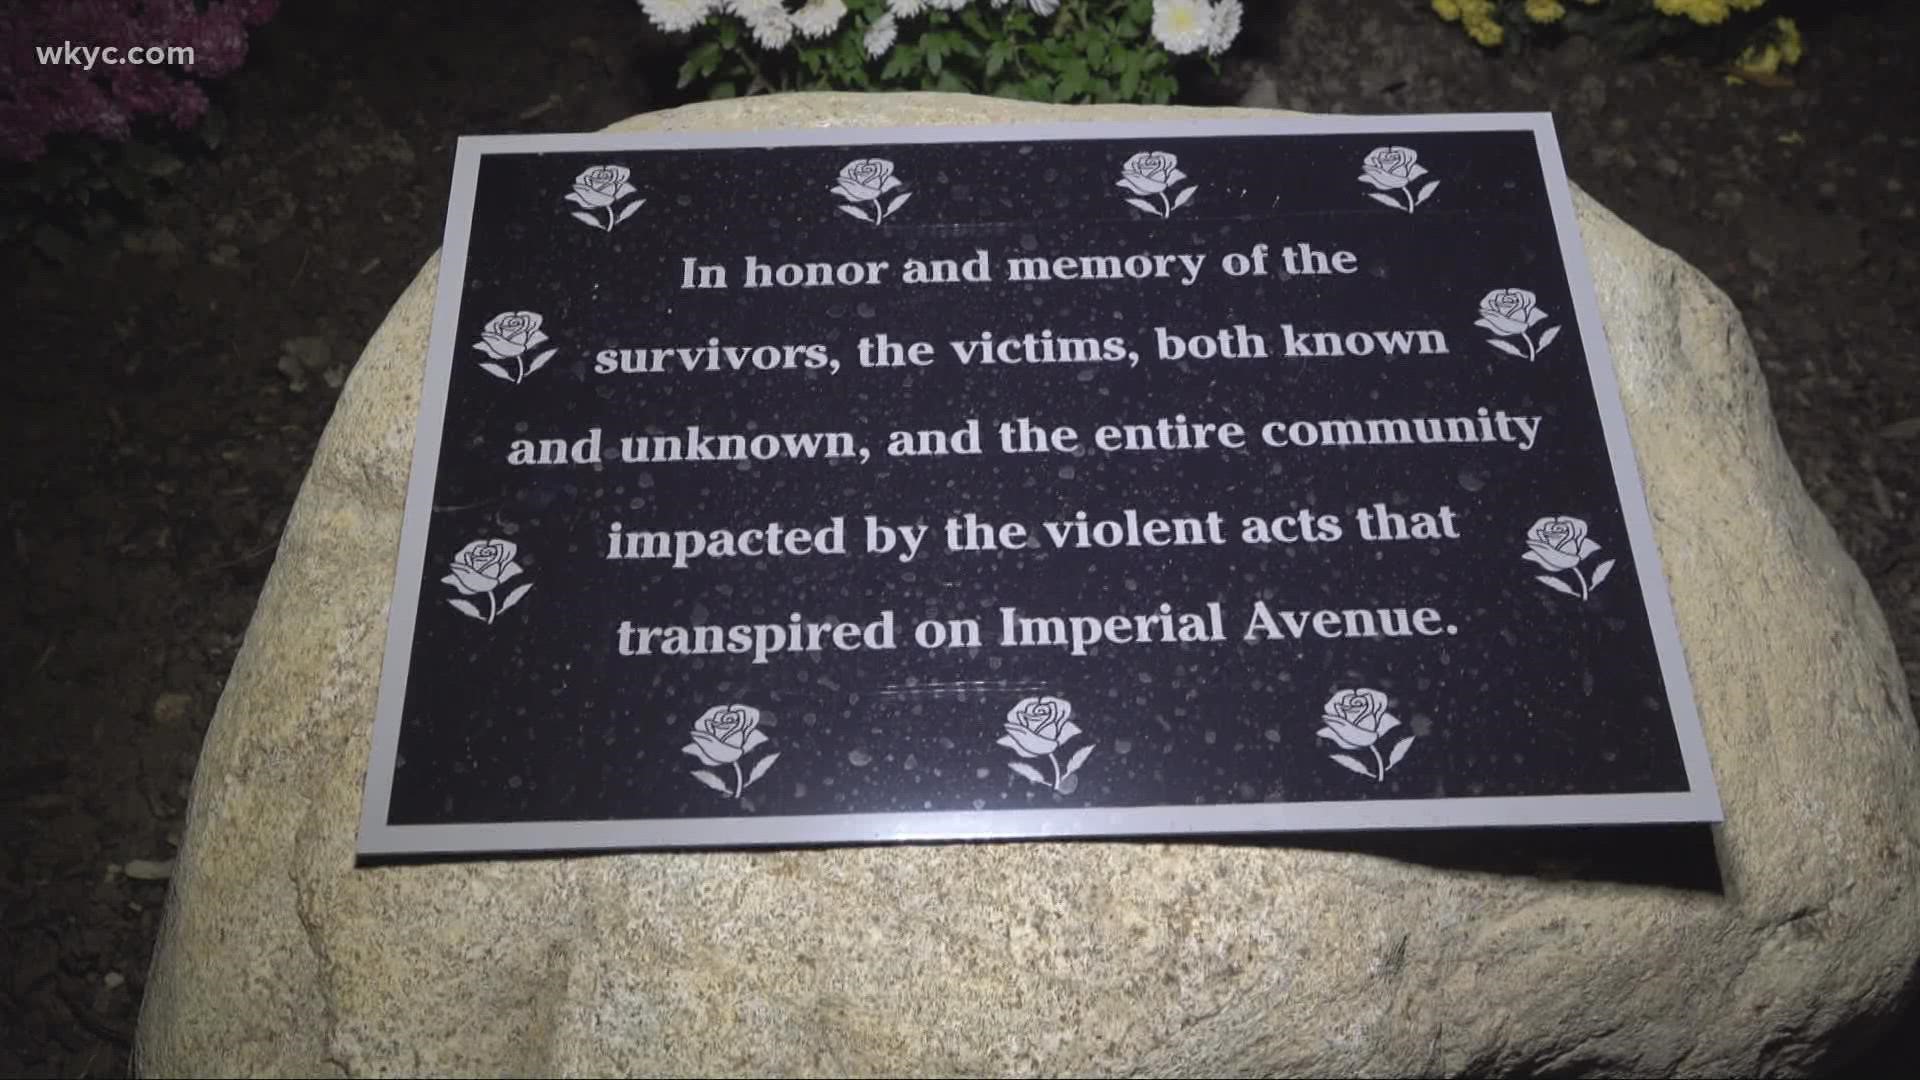 “This beautiful garden will be a living memorial to the Eleven Angels whose lives were so brutally taken."